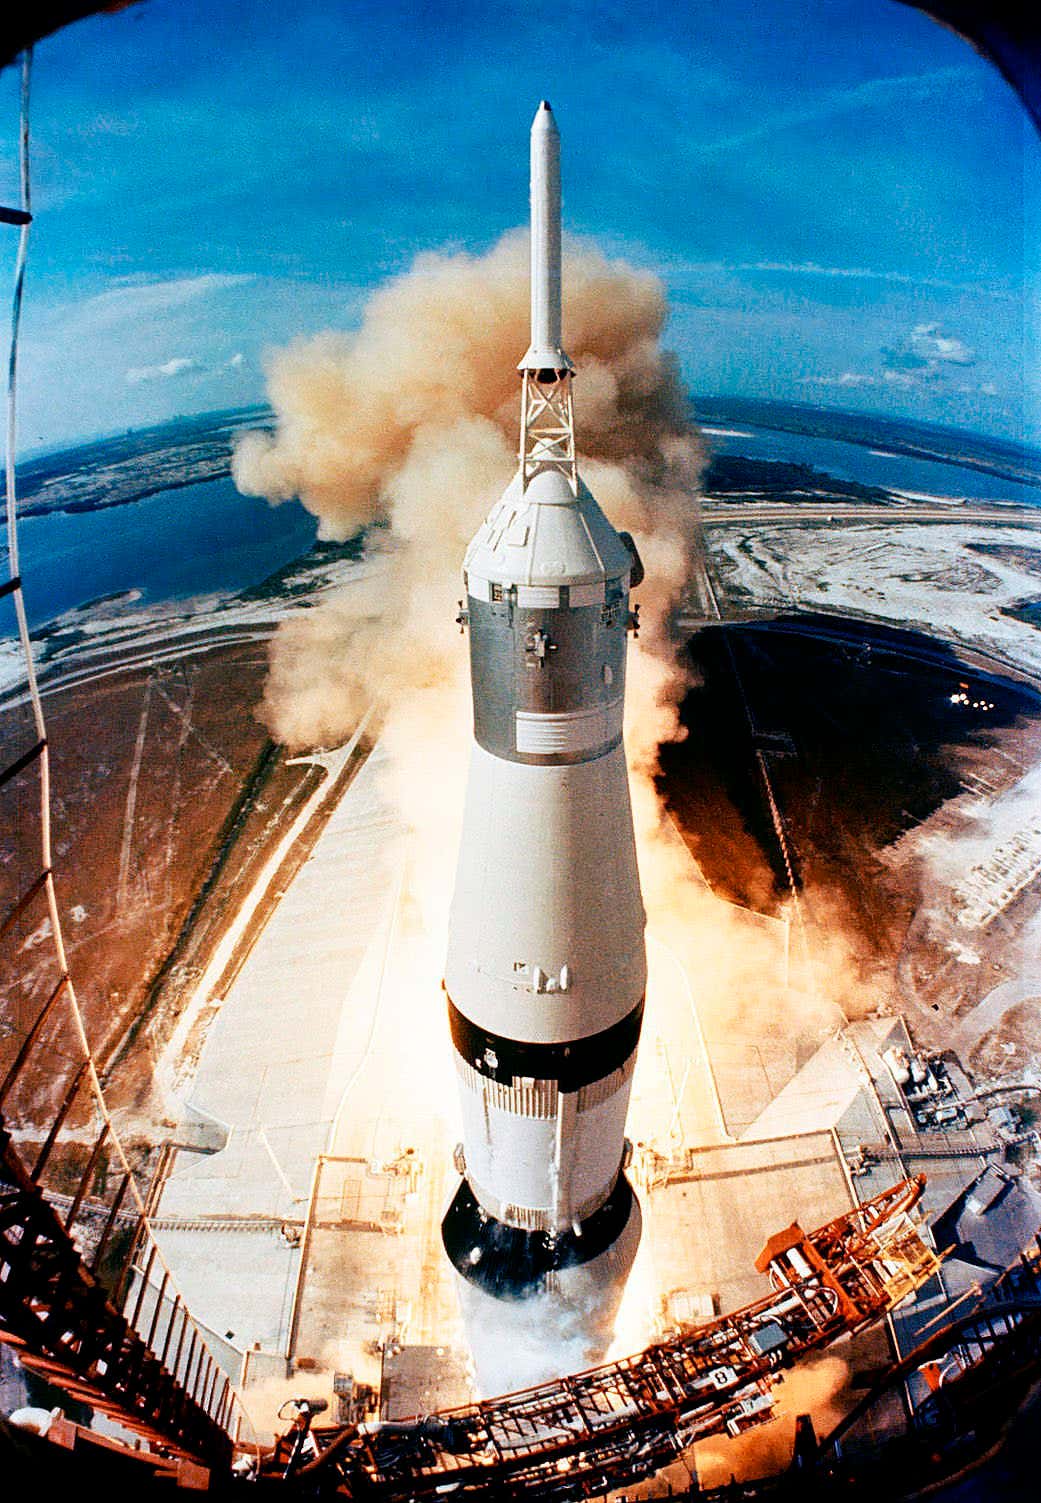 Apollo 11 launched on 16 July 1969 and set off on its four-day journey to the Moon.